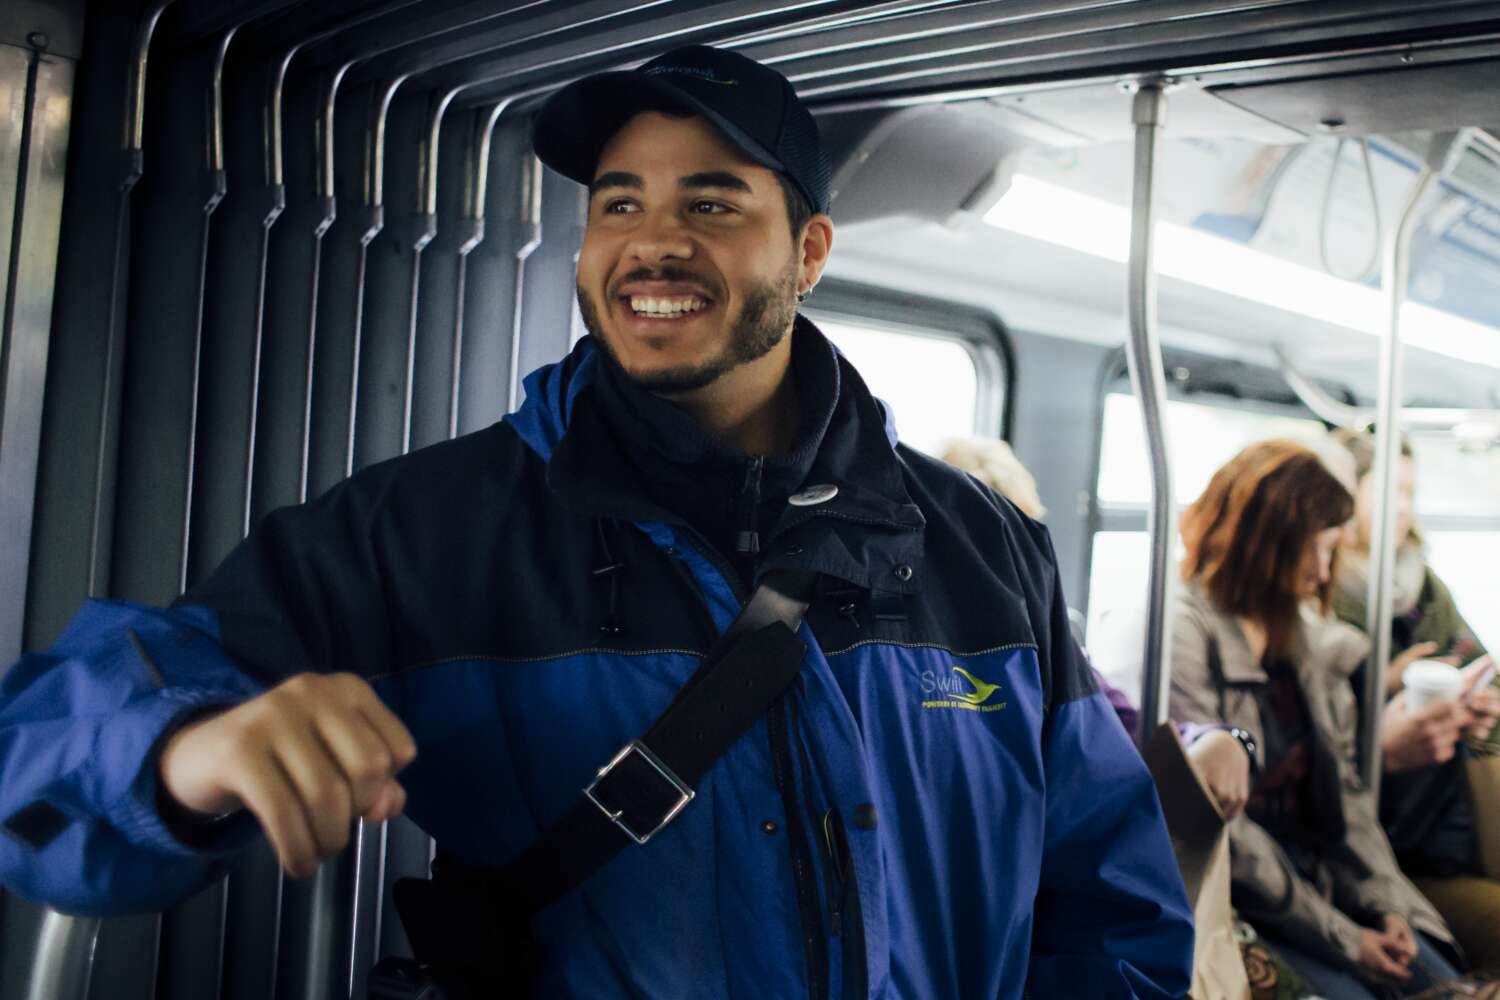 Community Transit Service Ambassadors are available at many transit centers to help with your questions and concerns.